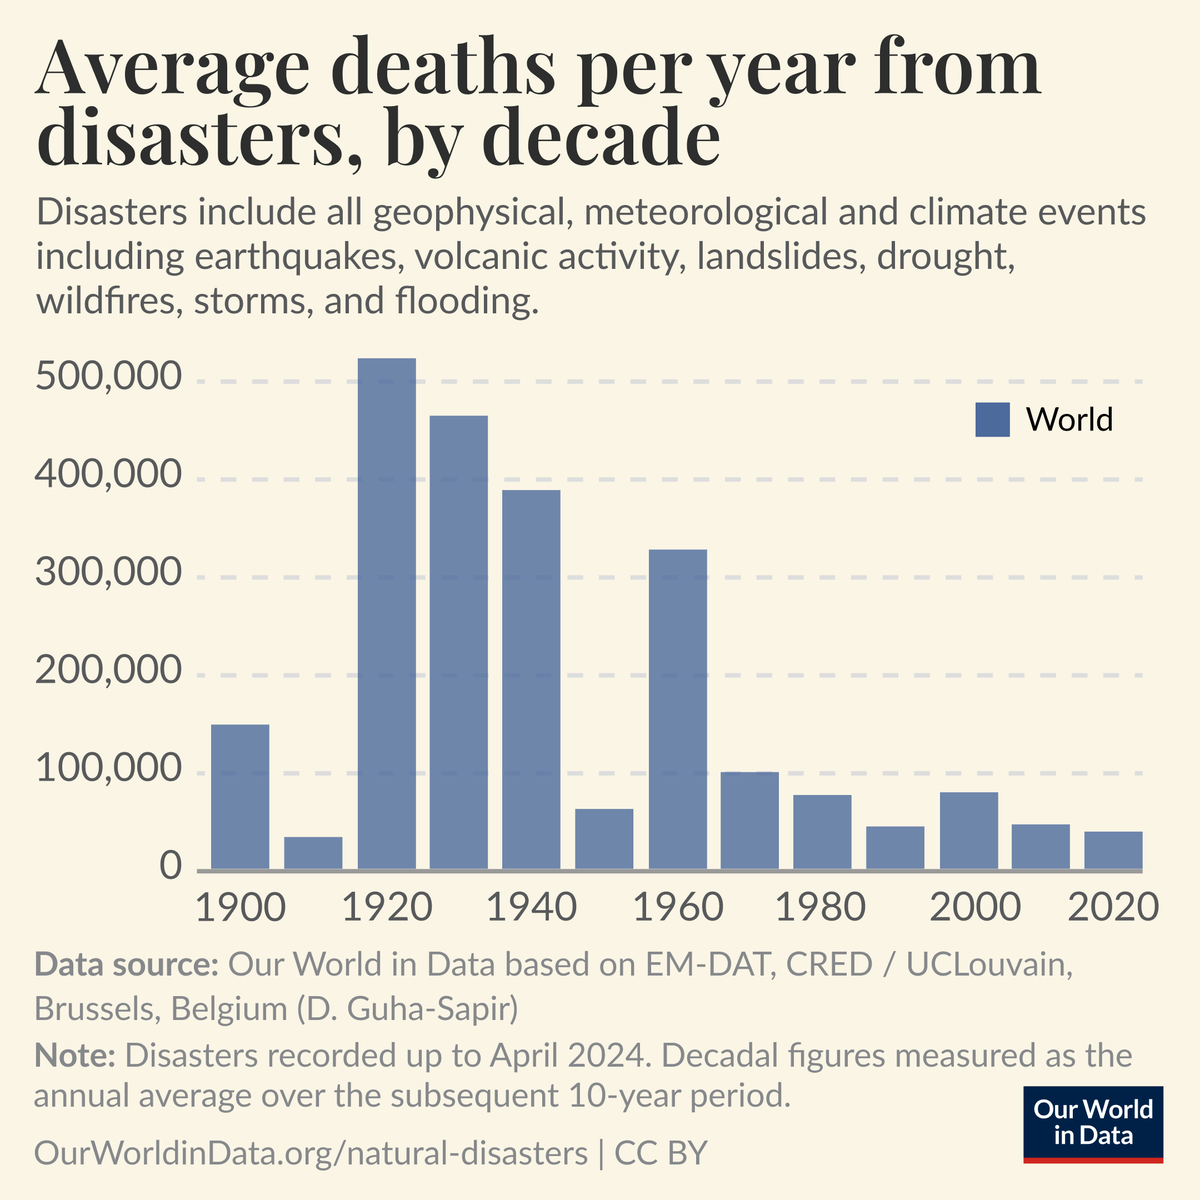 The number of people killed in disasters has fallen a lot over the last century, despite there being four times as many people. Deaths have declined not because disasters are now less frequent or intense, but because we’ve become better at protecting ourselves and each other.